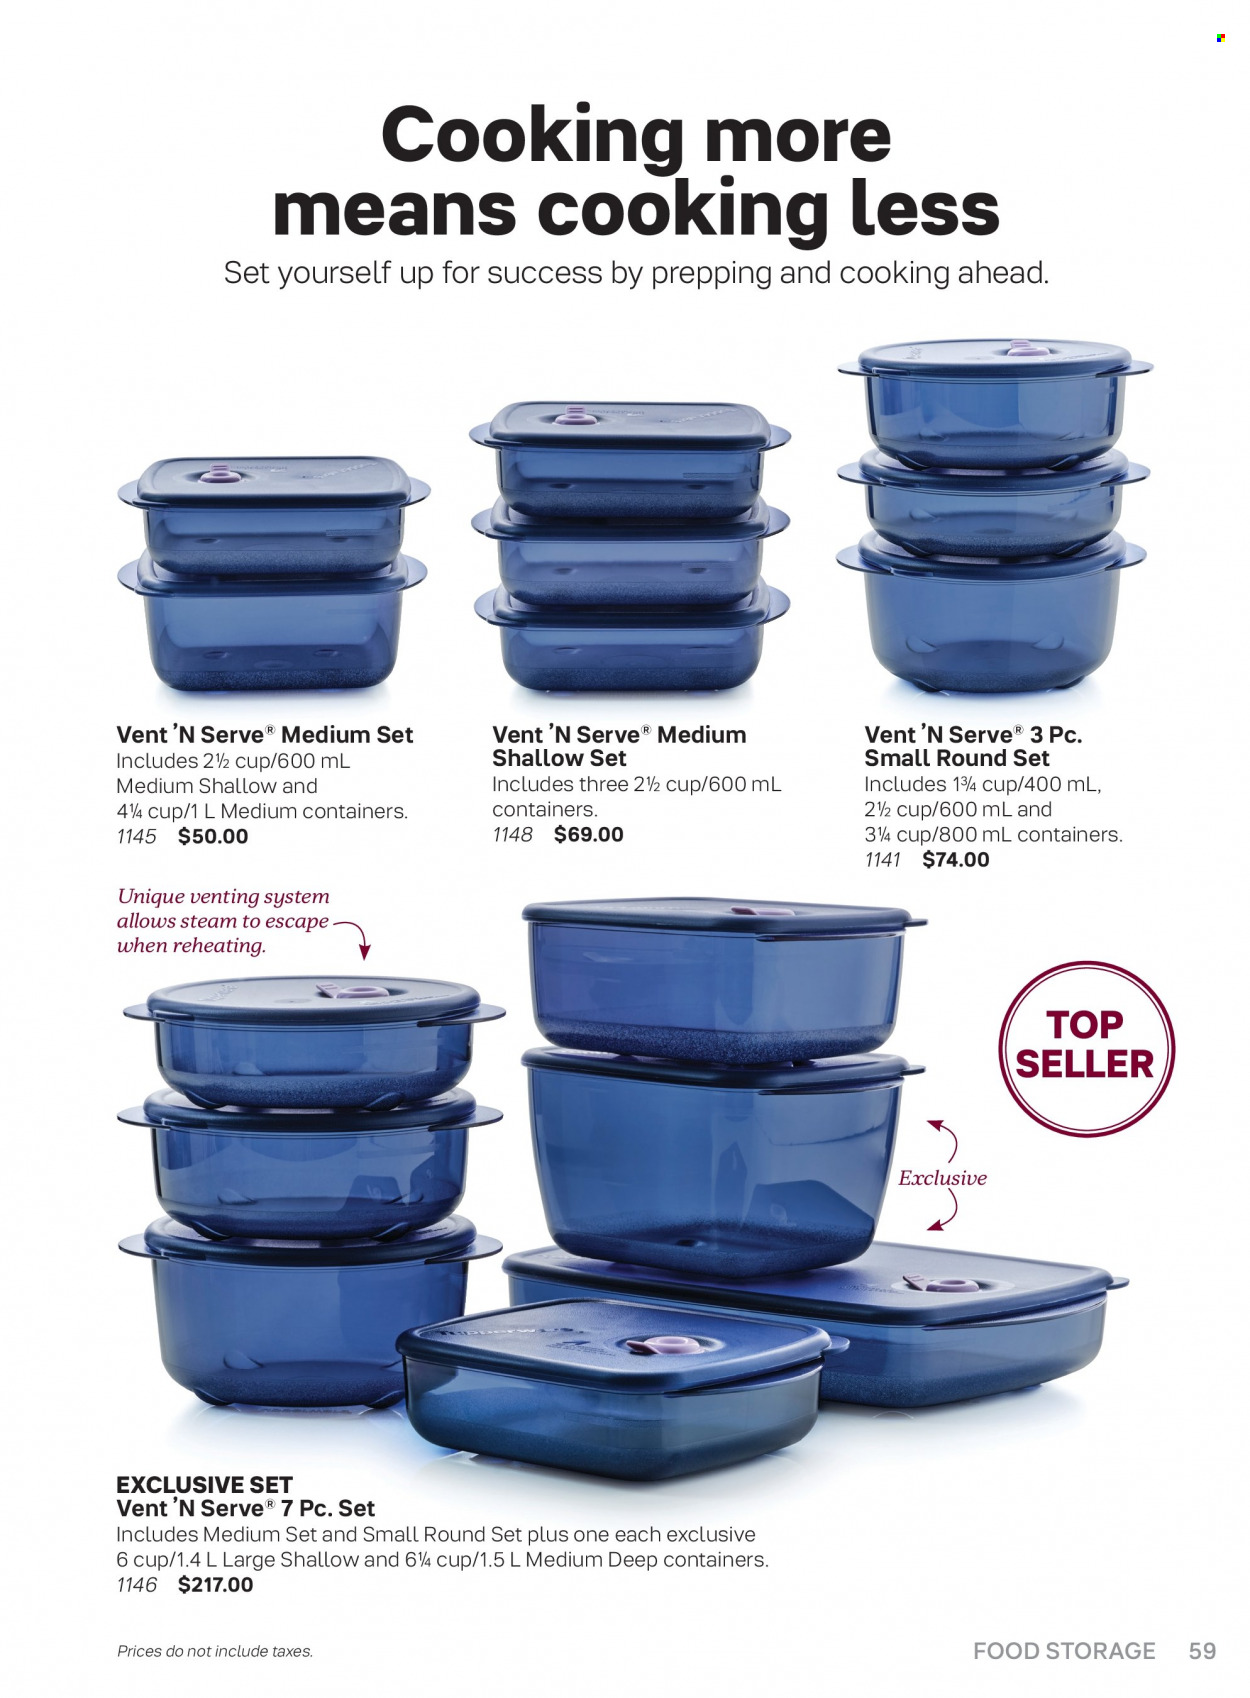 Tupperware flyer . Page 59.